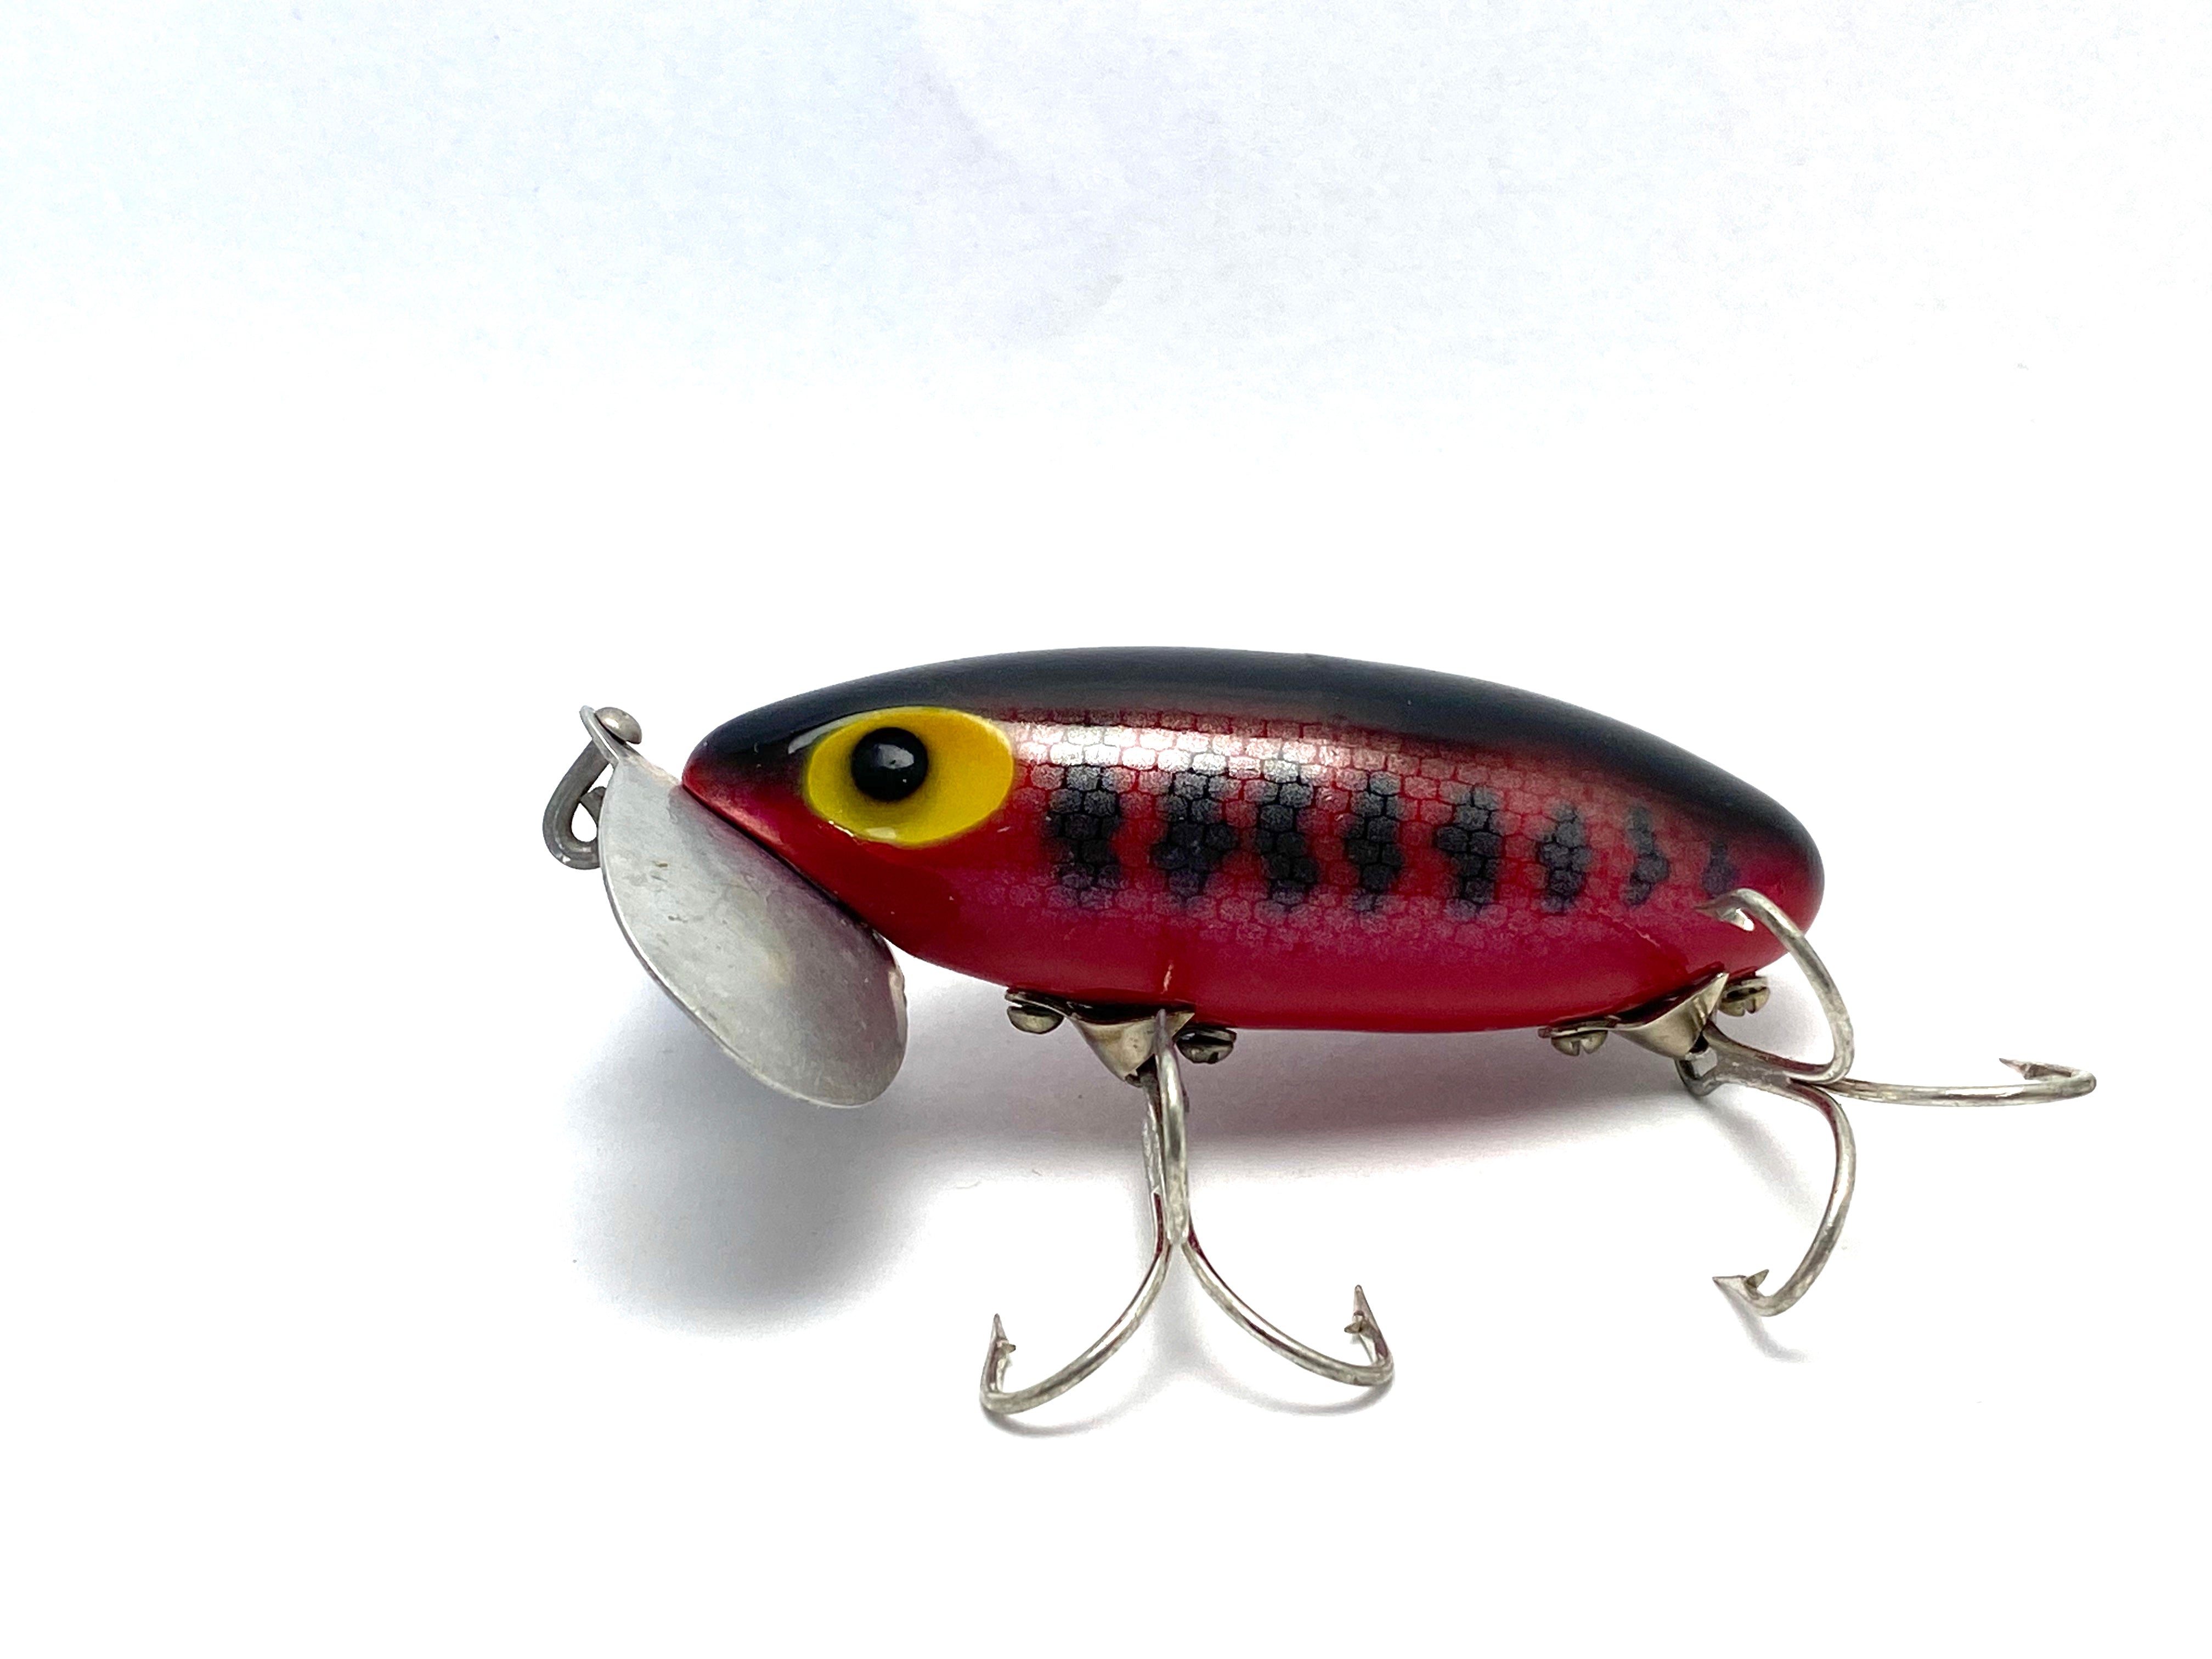 5 Vintage Fred Arbogast Bass Trout Fishing Lures Jitterbug Sputterbuzz Lure